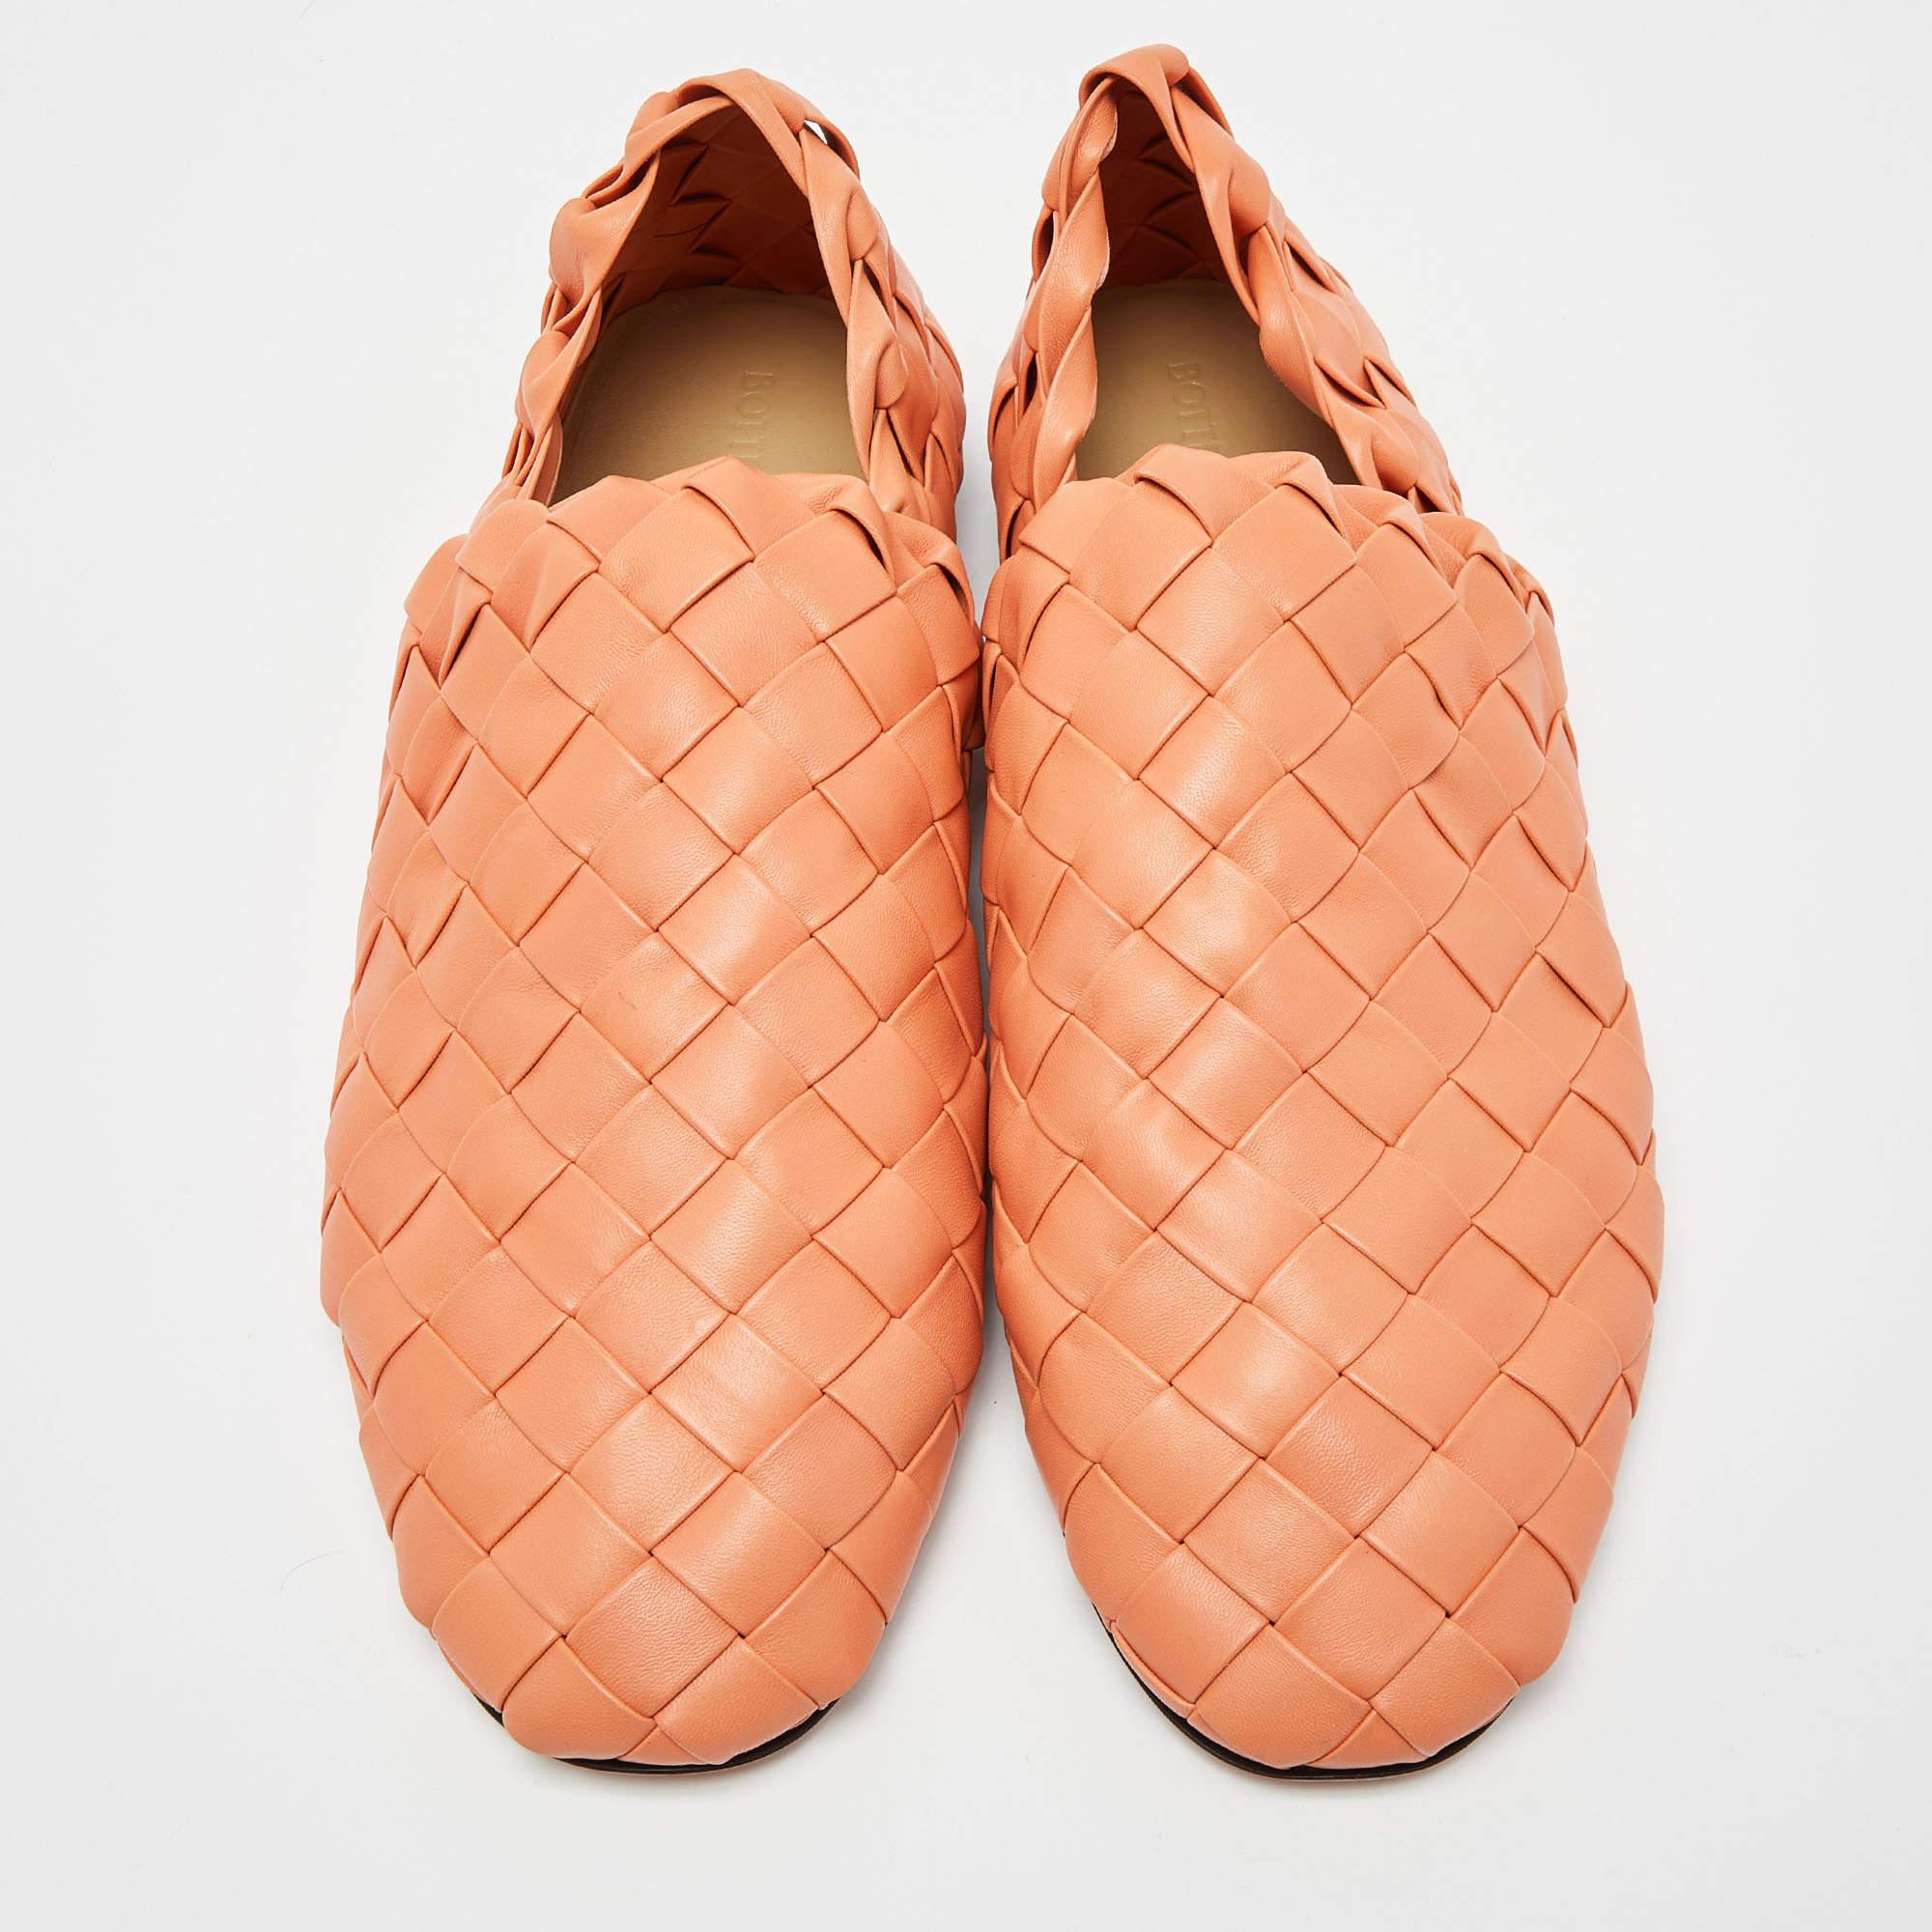 Let this comfortable pair be your first choice when you're out for a long day. These Bottega Veneta shoes have well-sewn uppers beautifully set on durable soles.

Includes
Original Dustbag

